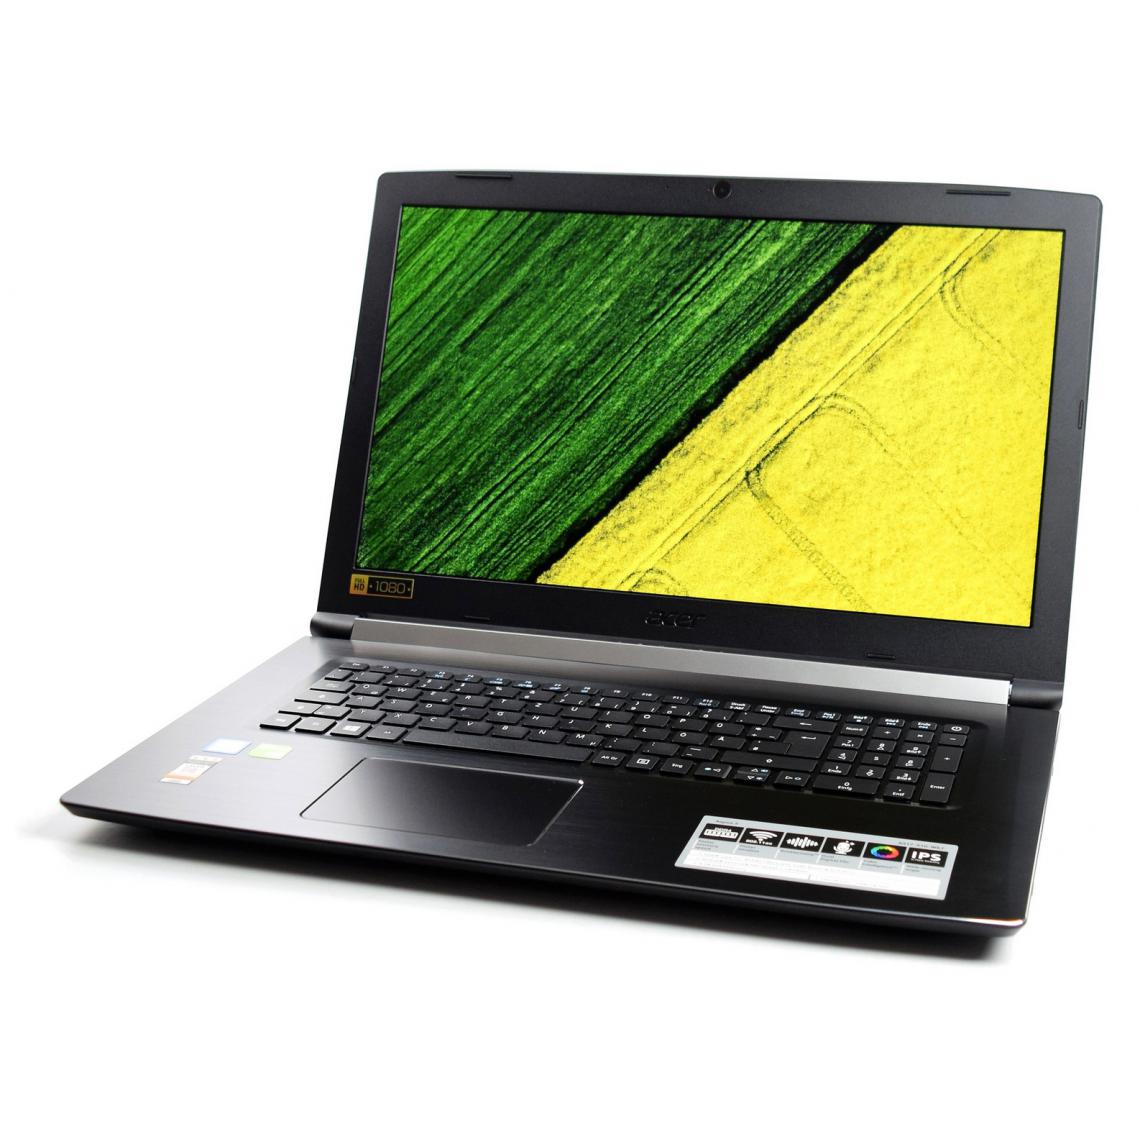 Acer - Aspire A517-52-34PS i3-1115G4 Aspire A517-52-34PS Intel Core i3-1115G4 17.3p FHD IPS 4Go 256Go PCIe NVMe SSD Intel HD Graphics W10H 3a - PC Portable